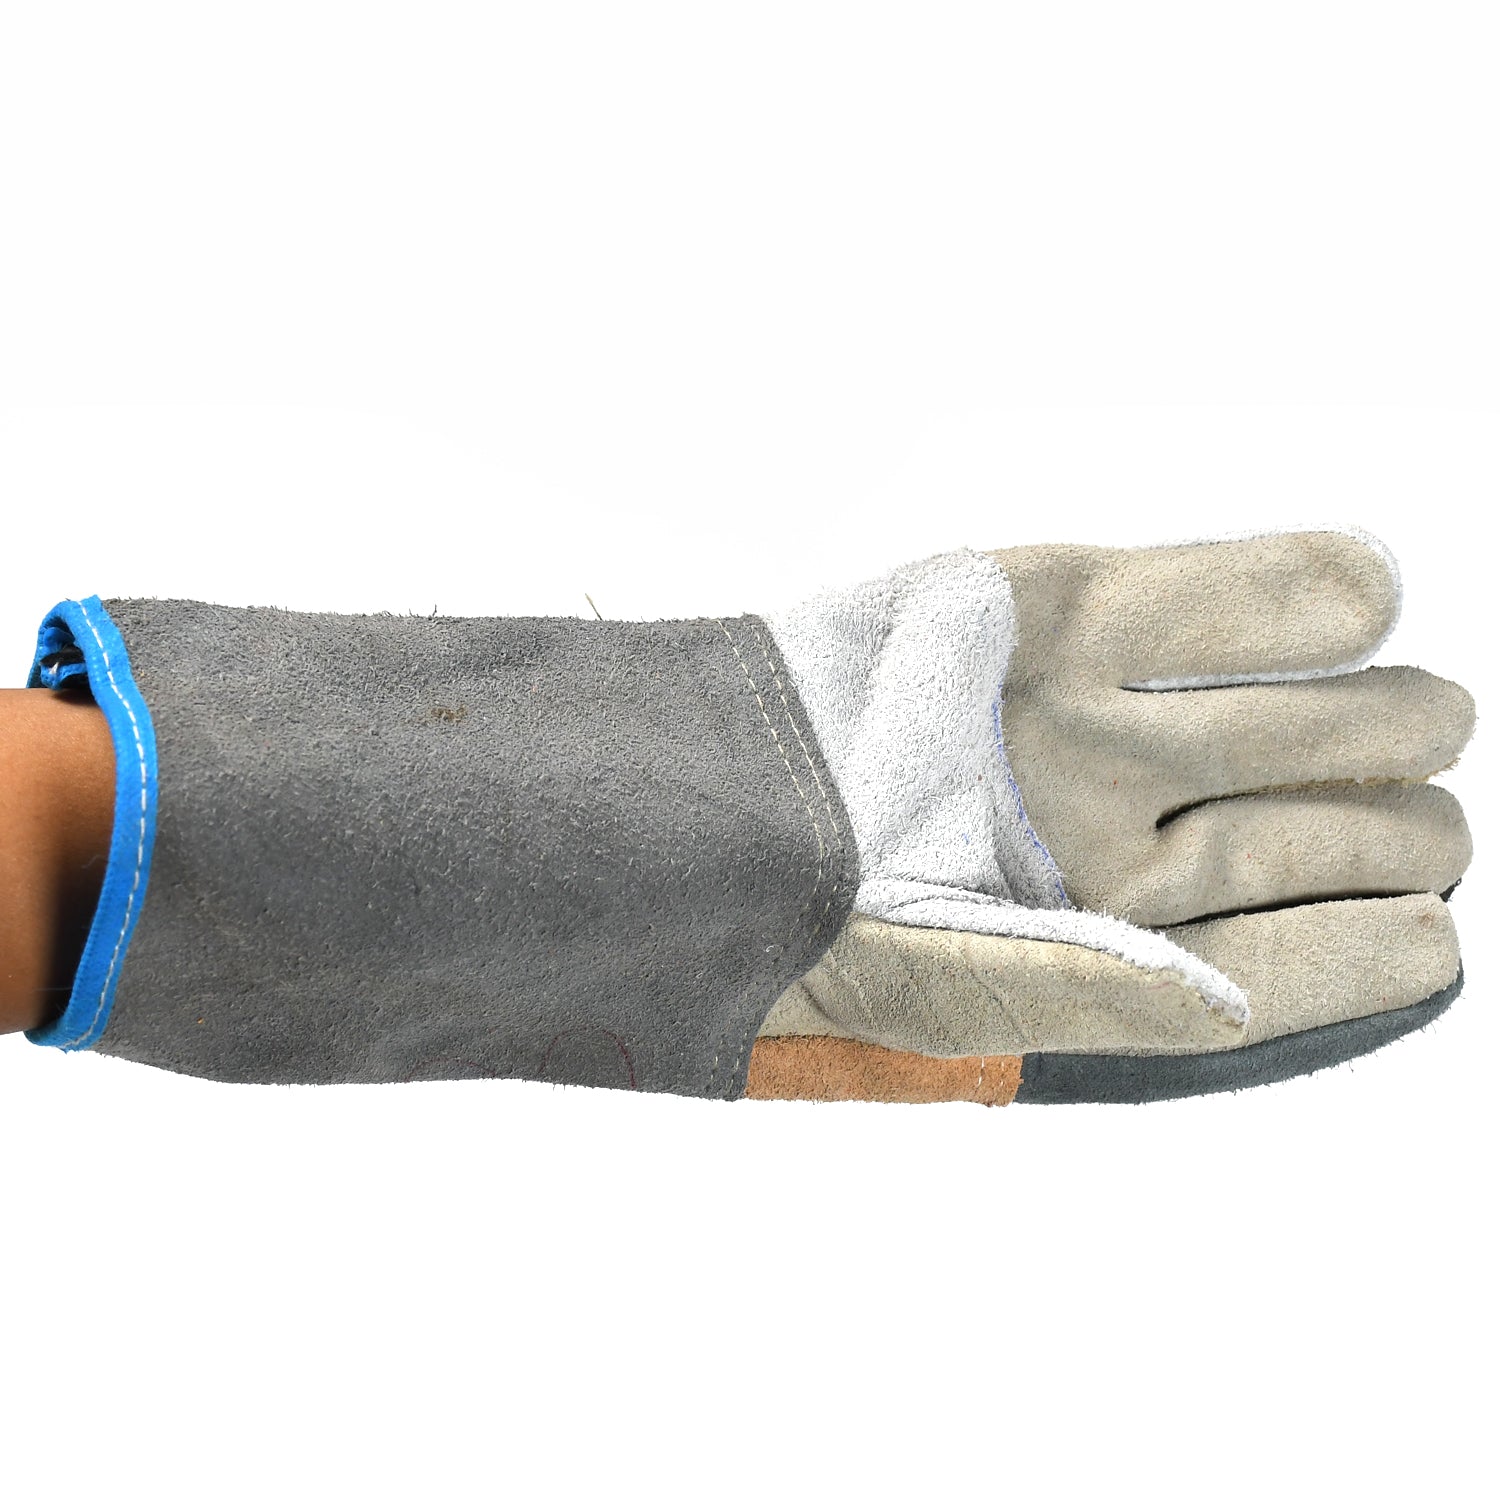 0716A Industrial Heavy Duty Welding Leather Glove With Inner Lining, Heat And Abrasion Resistance Glove 